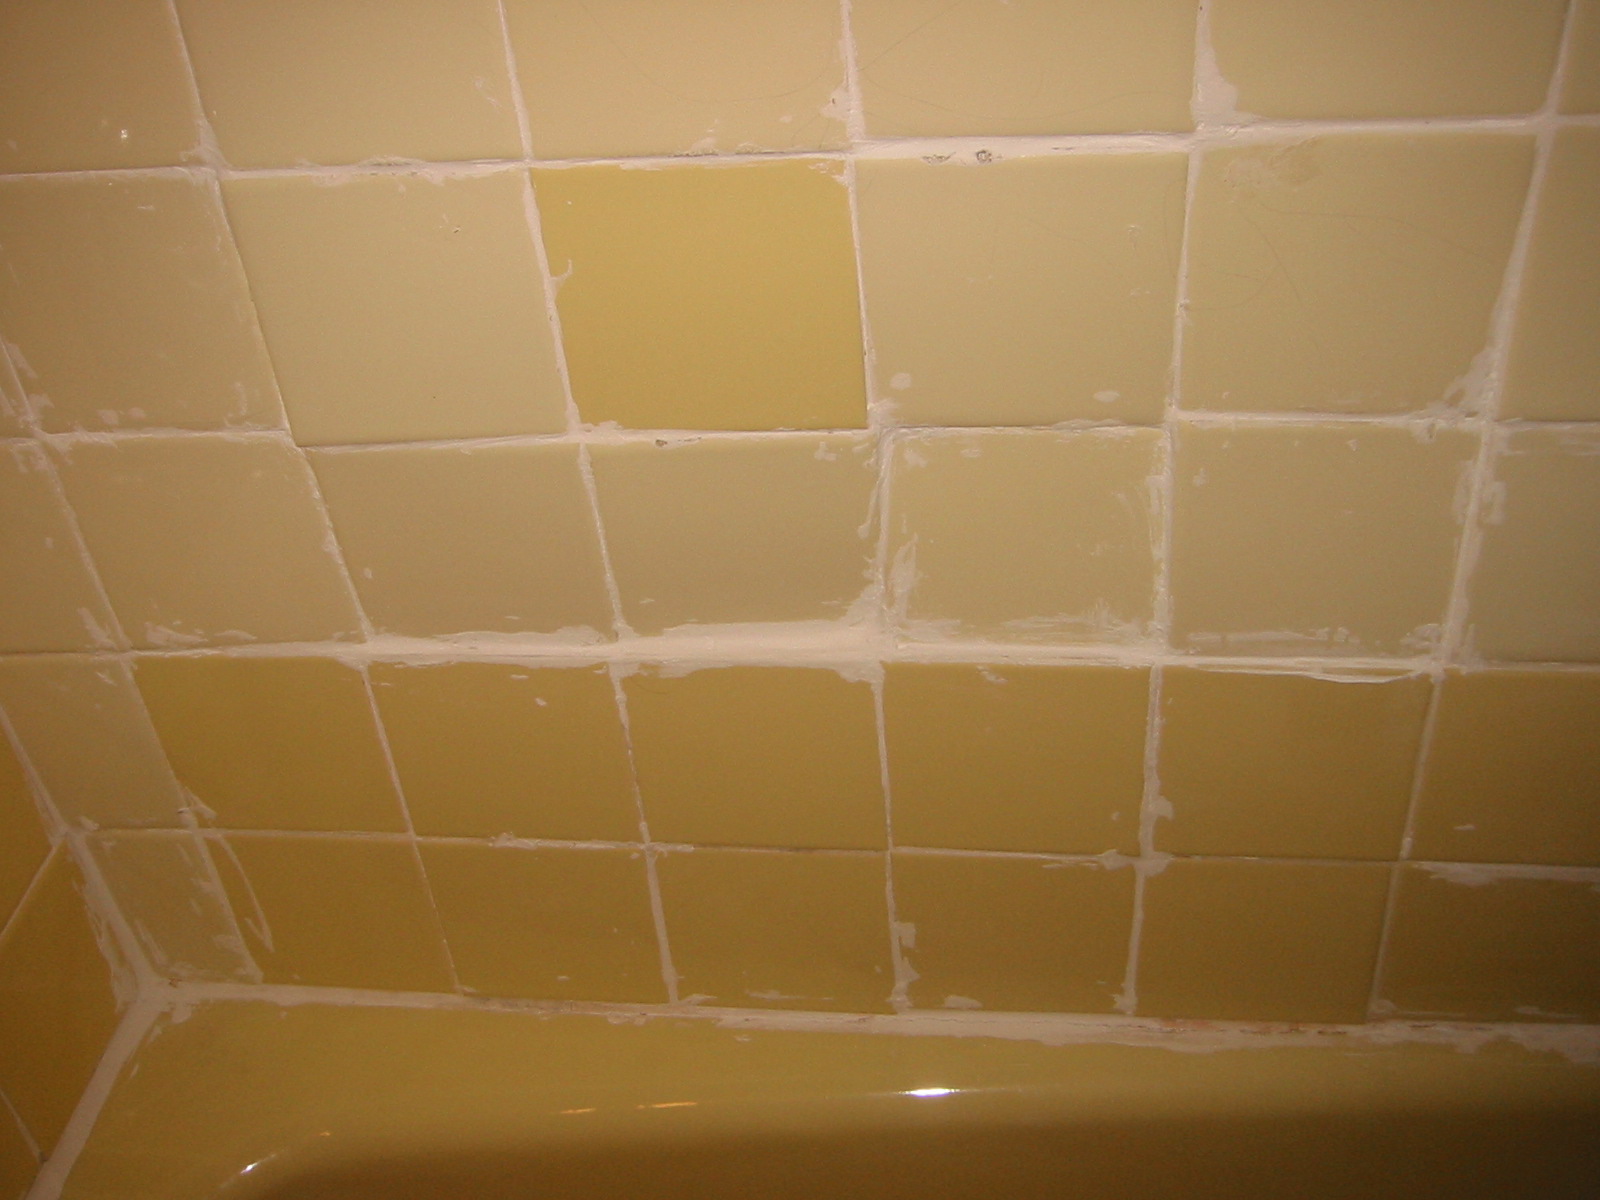 Your Bathroom Tiles Look Old And Need, Can You Cover Old Bathroom Tile